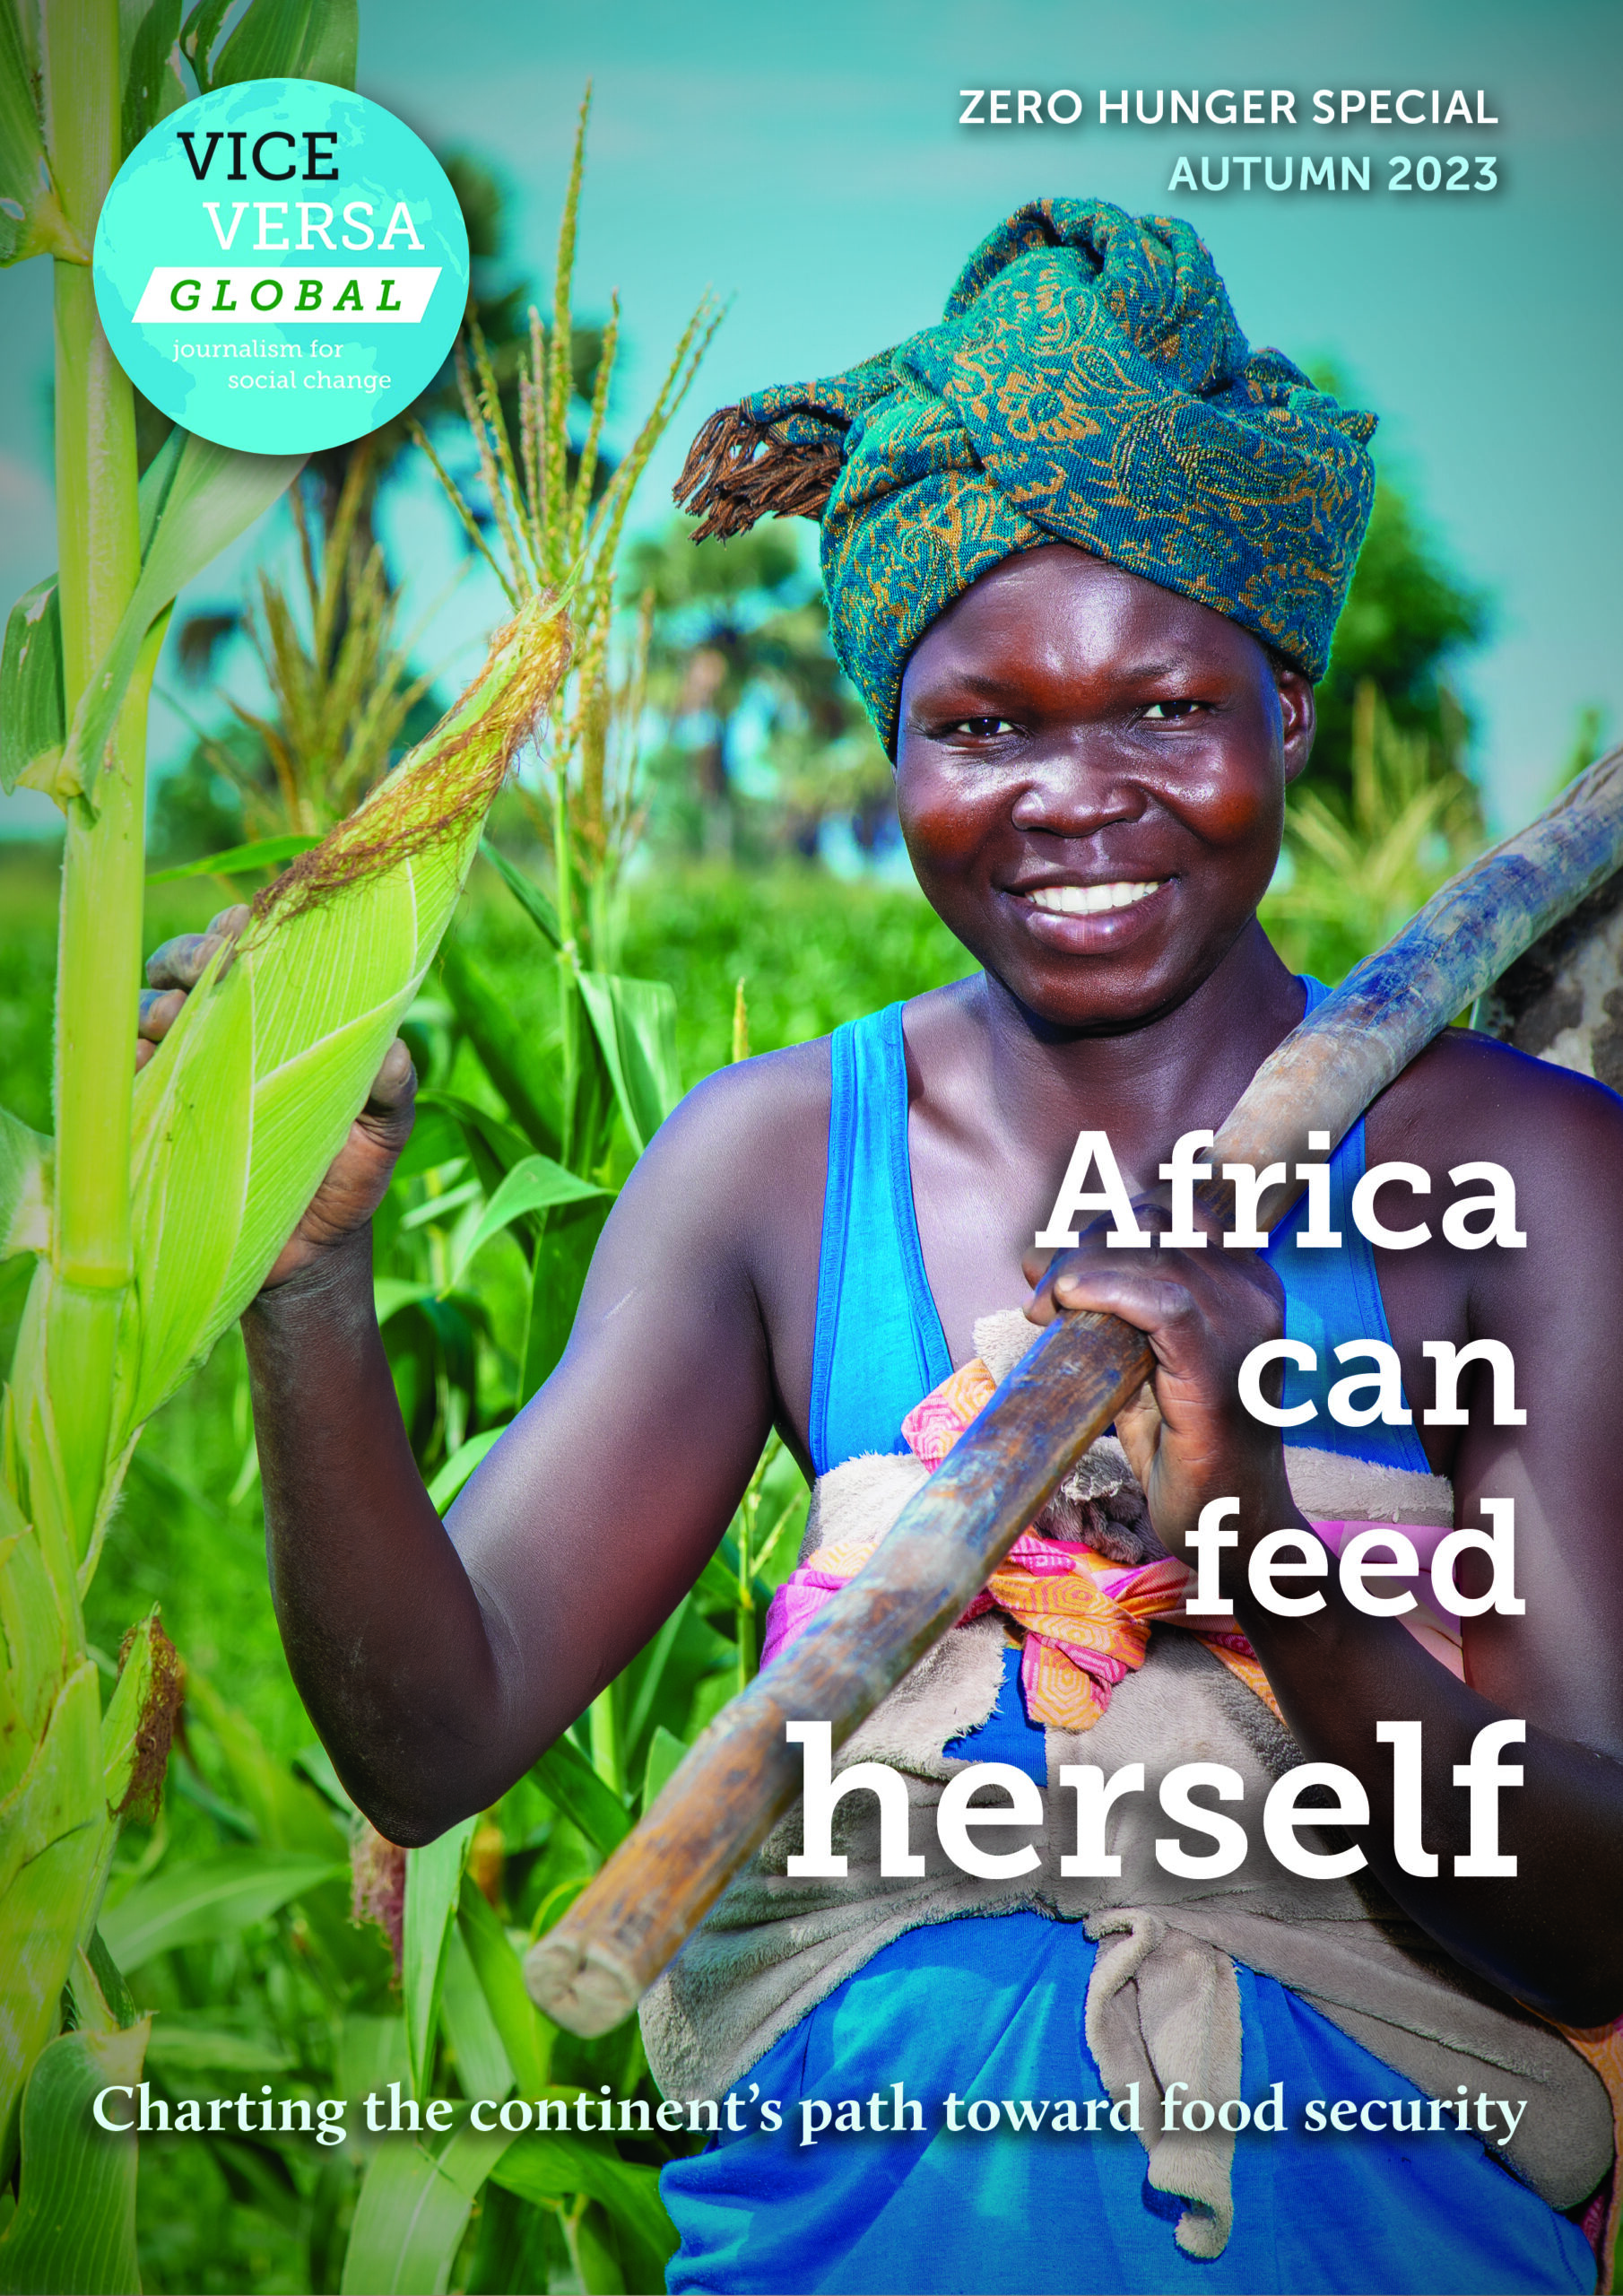 Zero Hunger Special “Africa can feed herself”